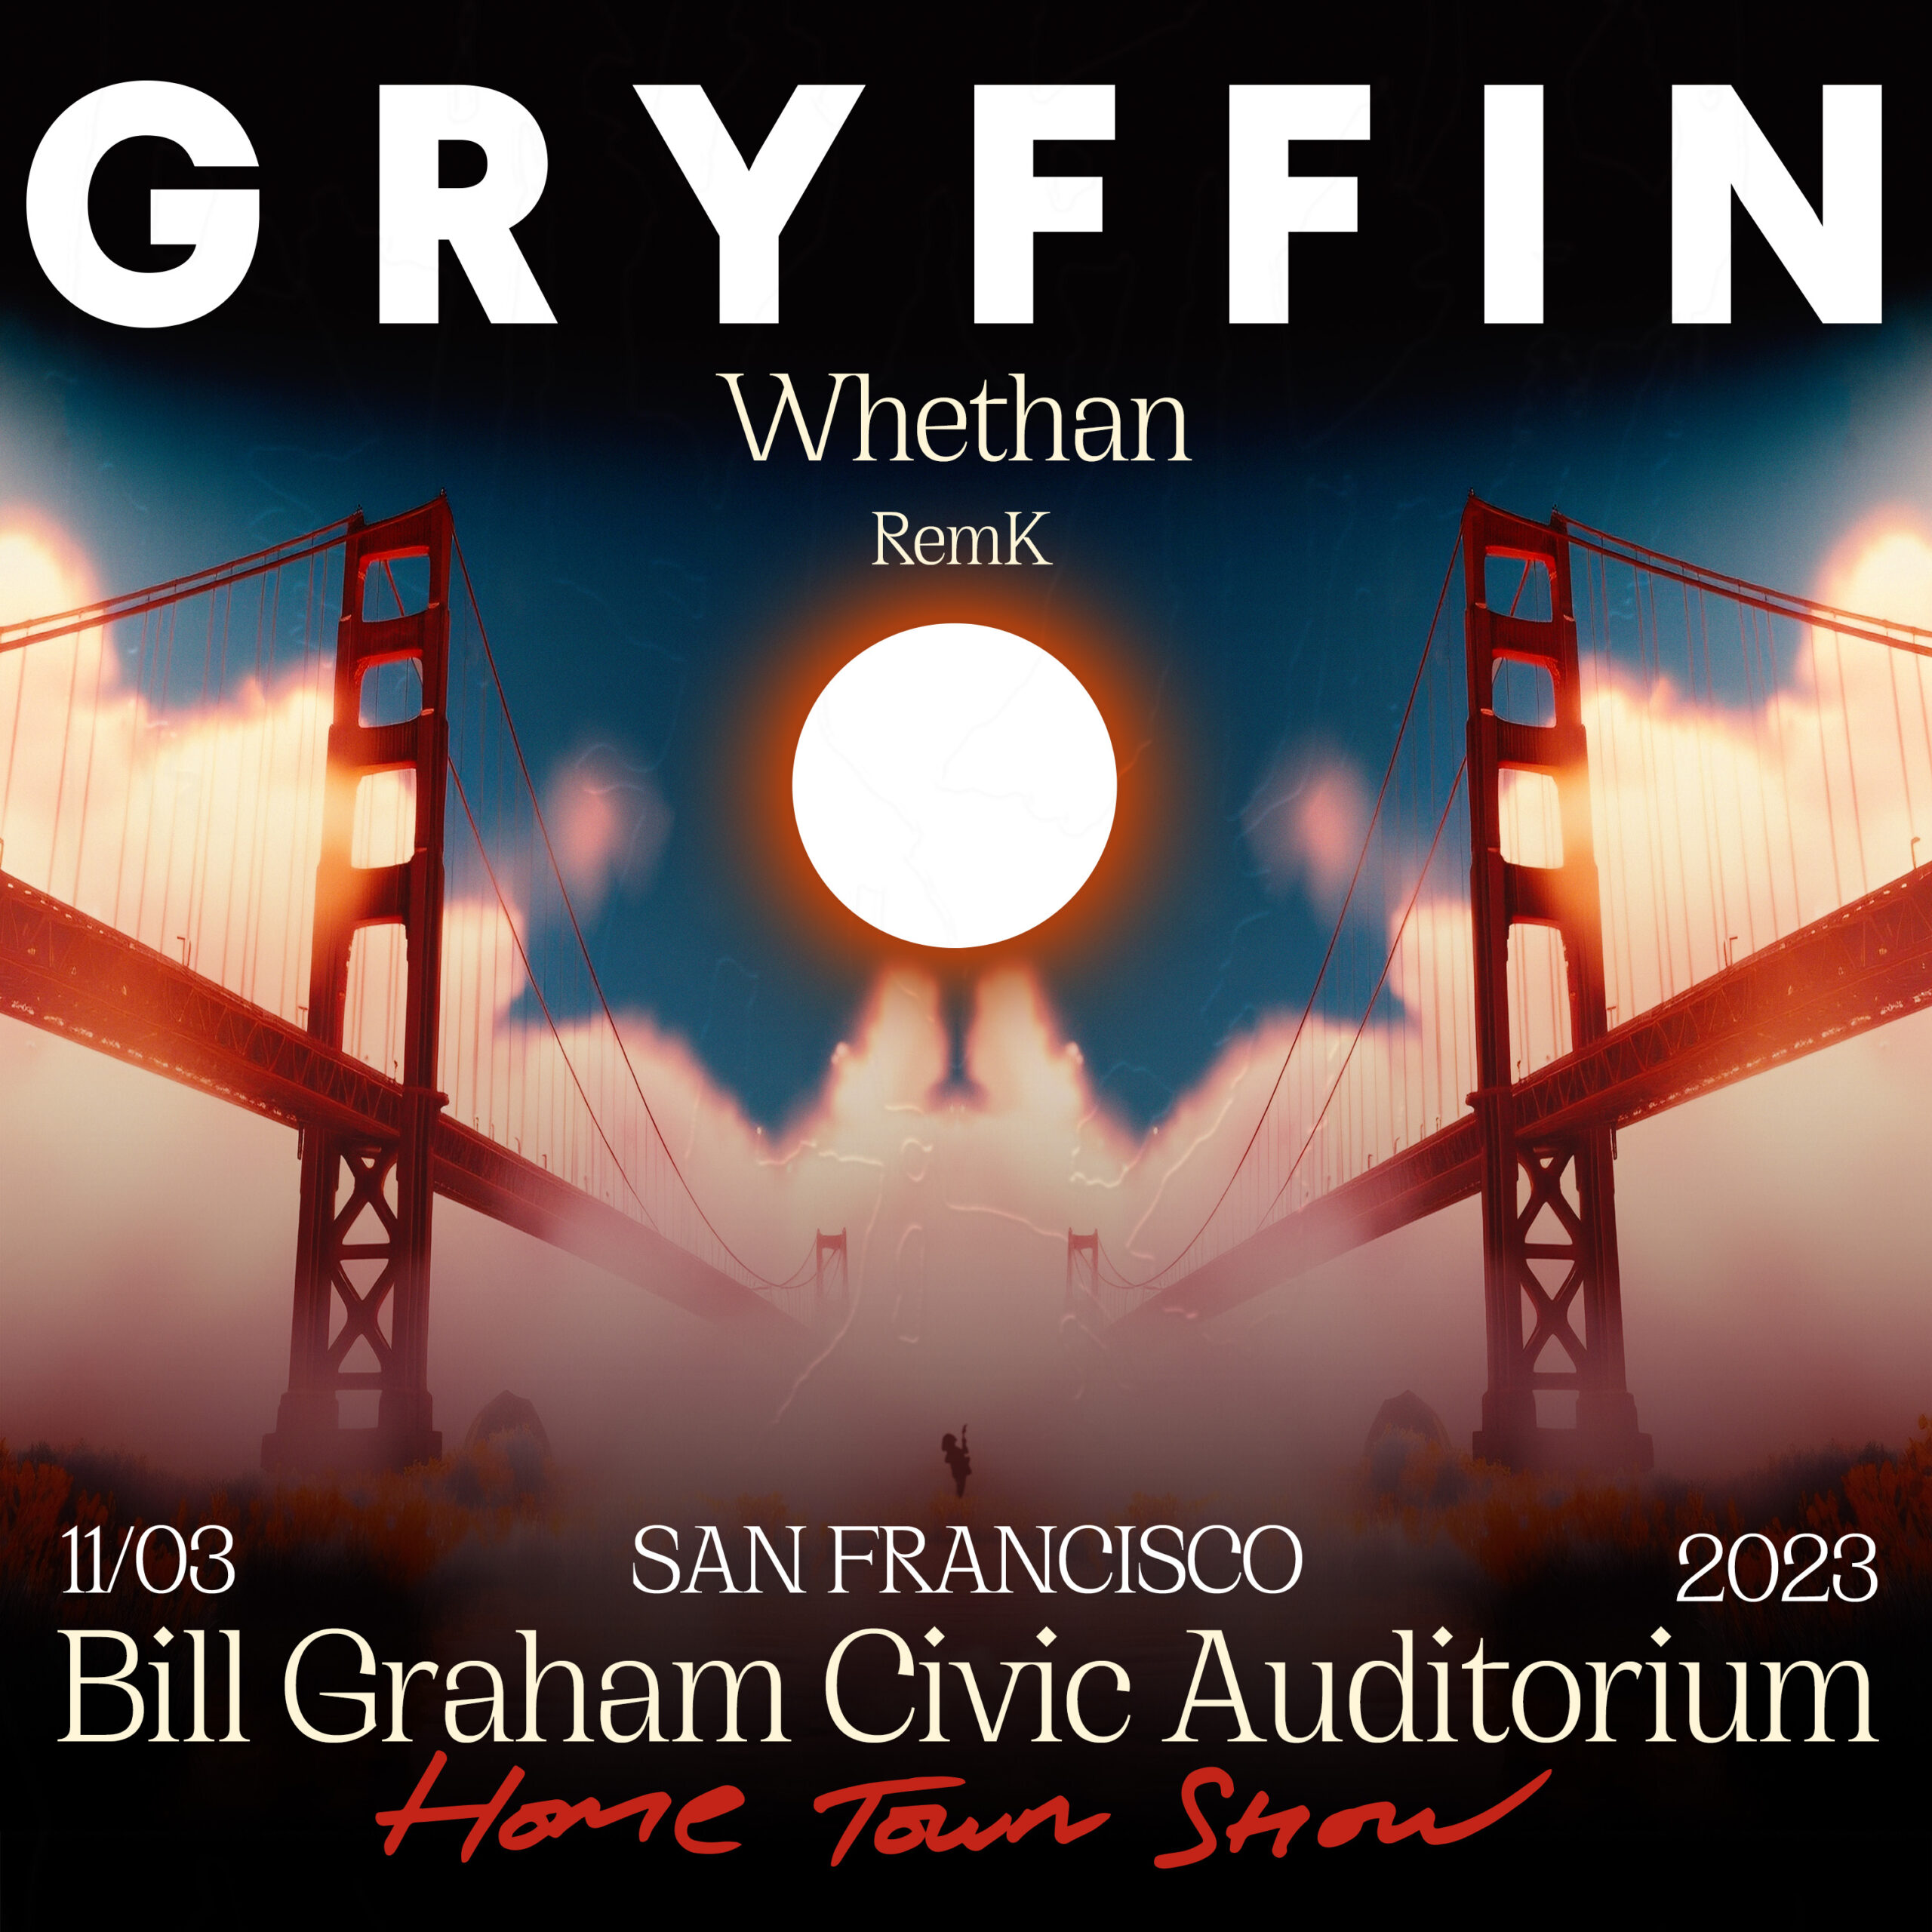 ANOTHER PLANET ENTERTAINMENT ANNOUNCES GRYFFIN SHOW AT BILL GRAHAM CIVIC AUDITORIUM FRIDAY, NOV. 3